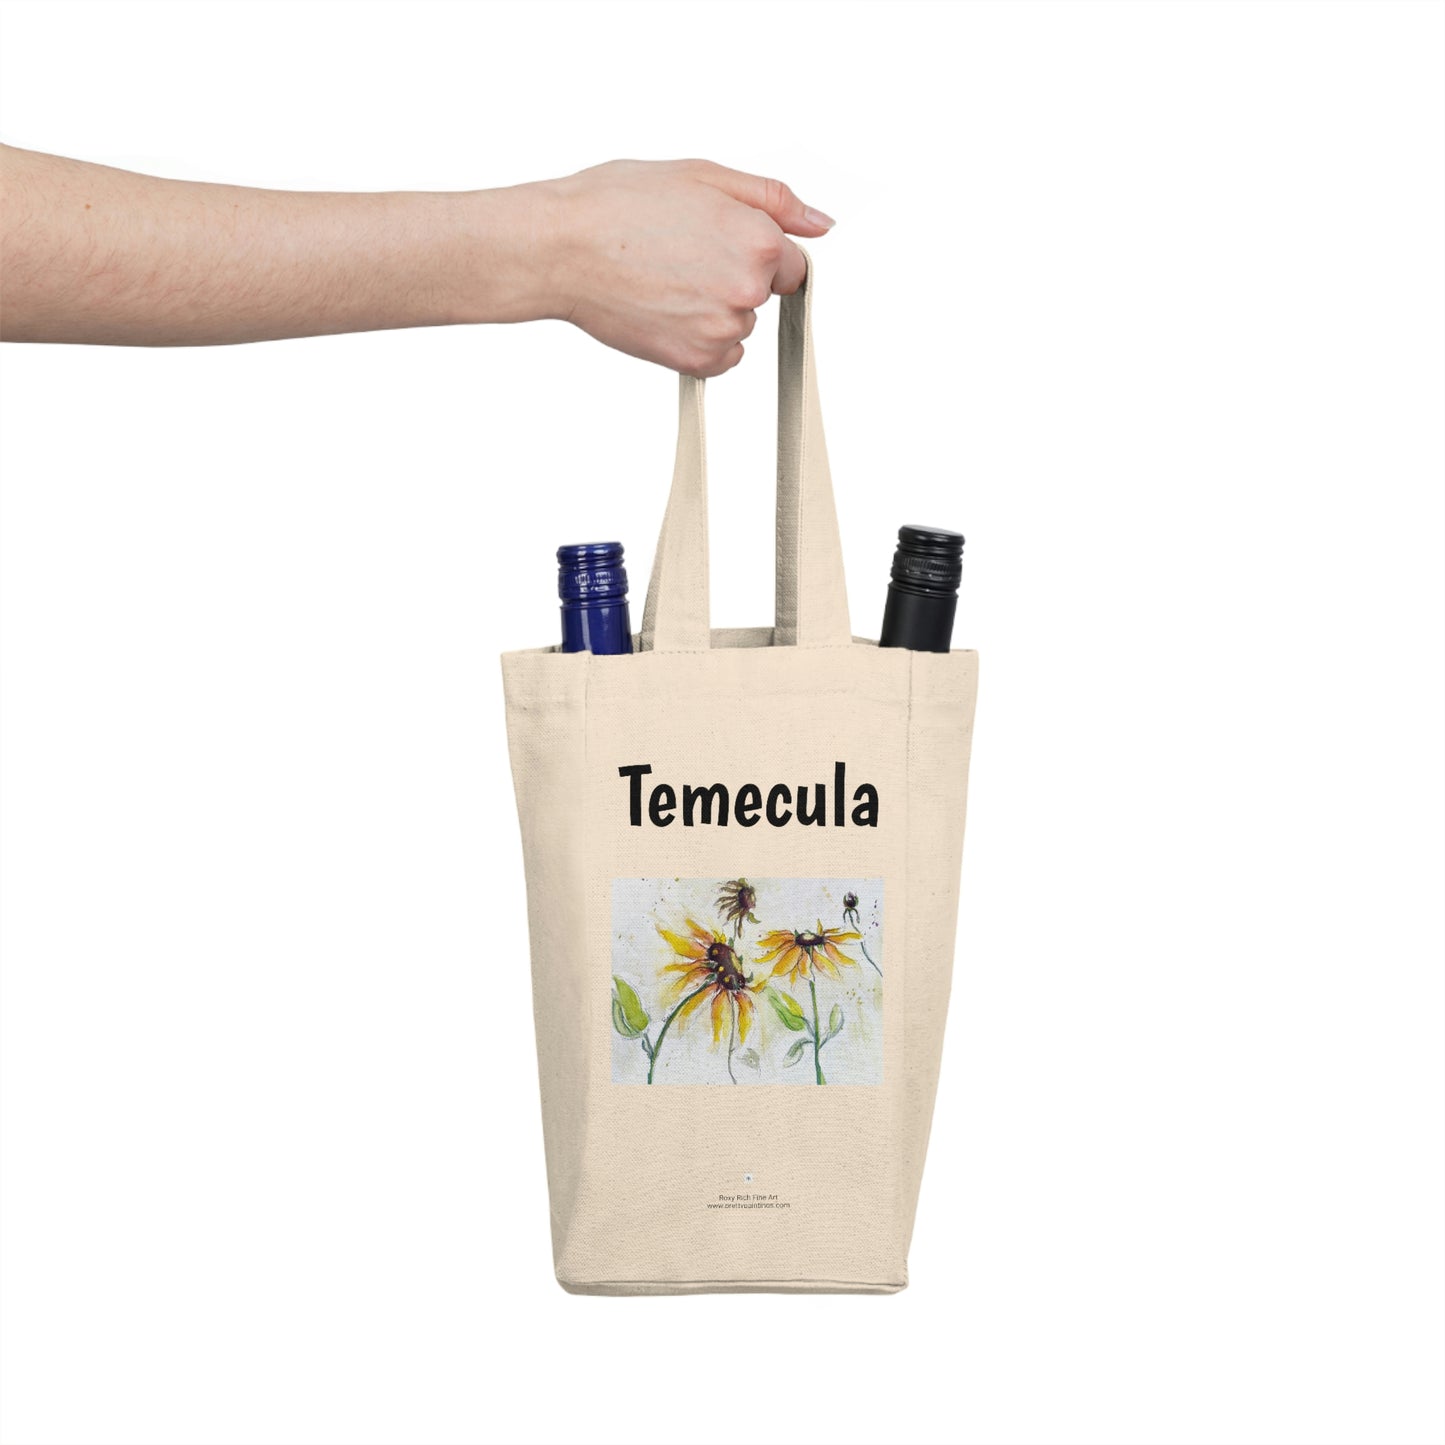 Temecula Double Wine Tote Bag featuring "Autumn Sunflowers" painting